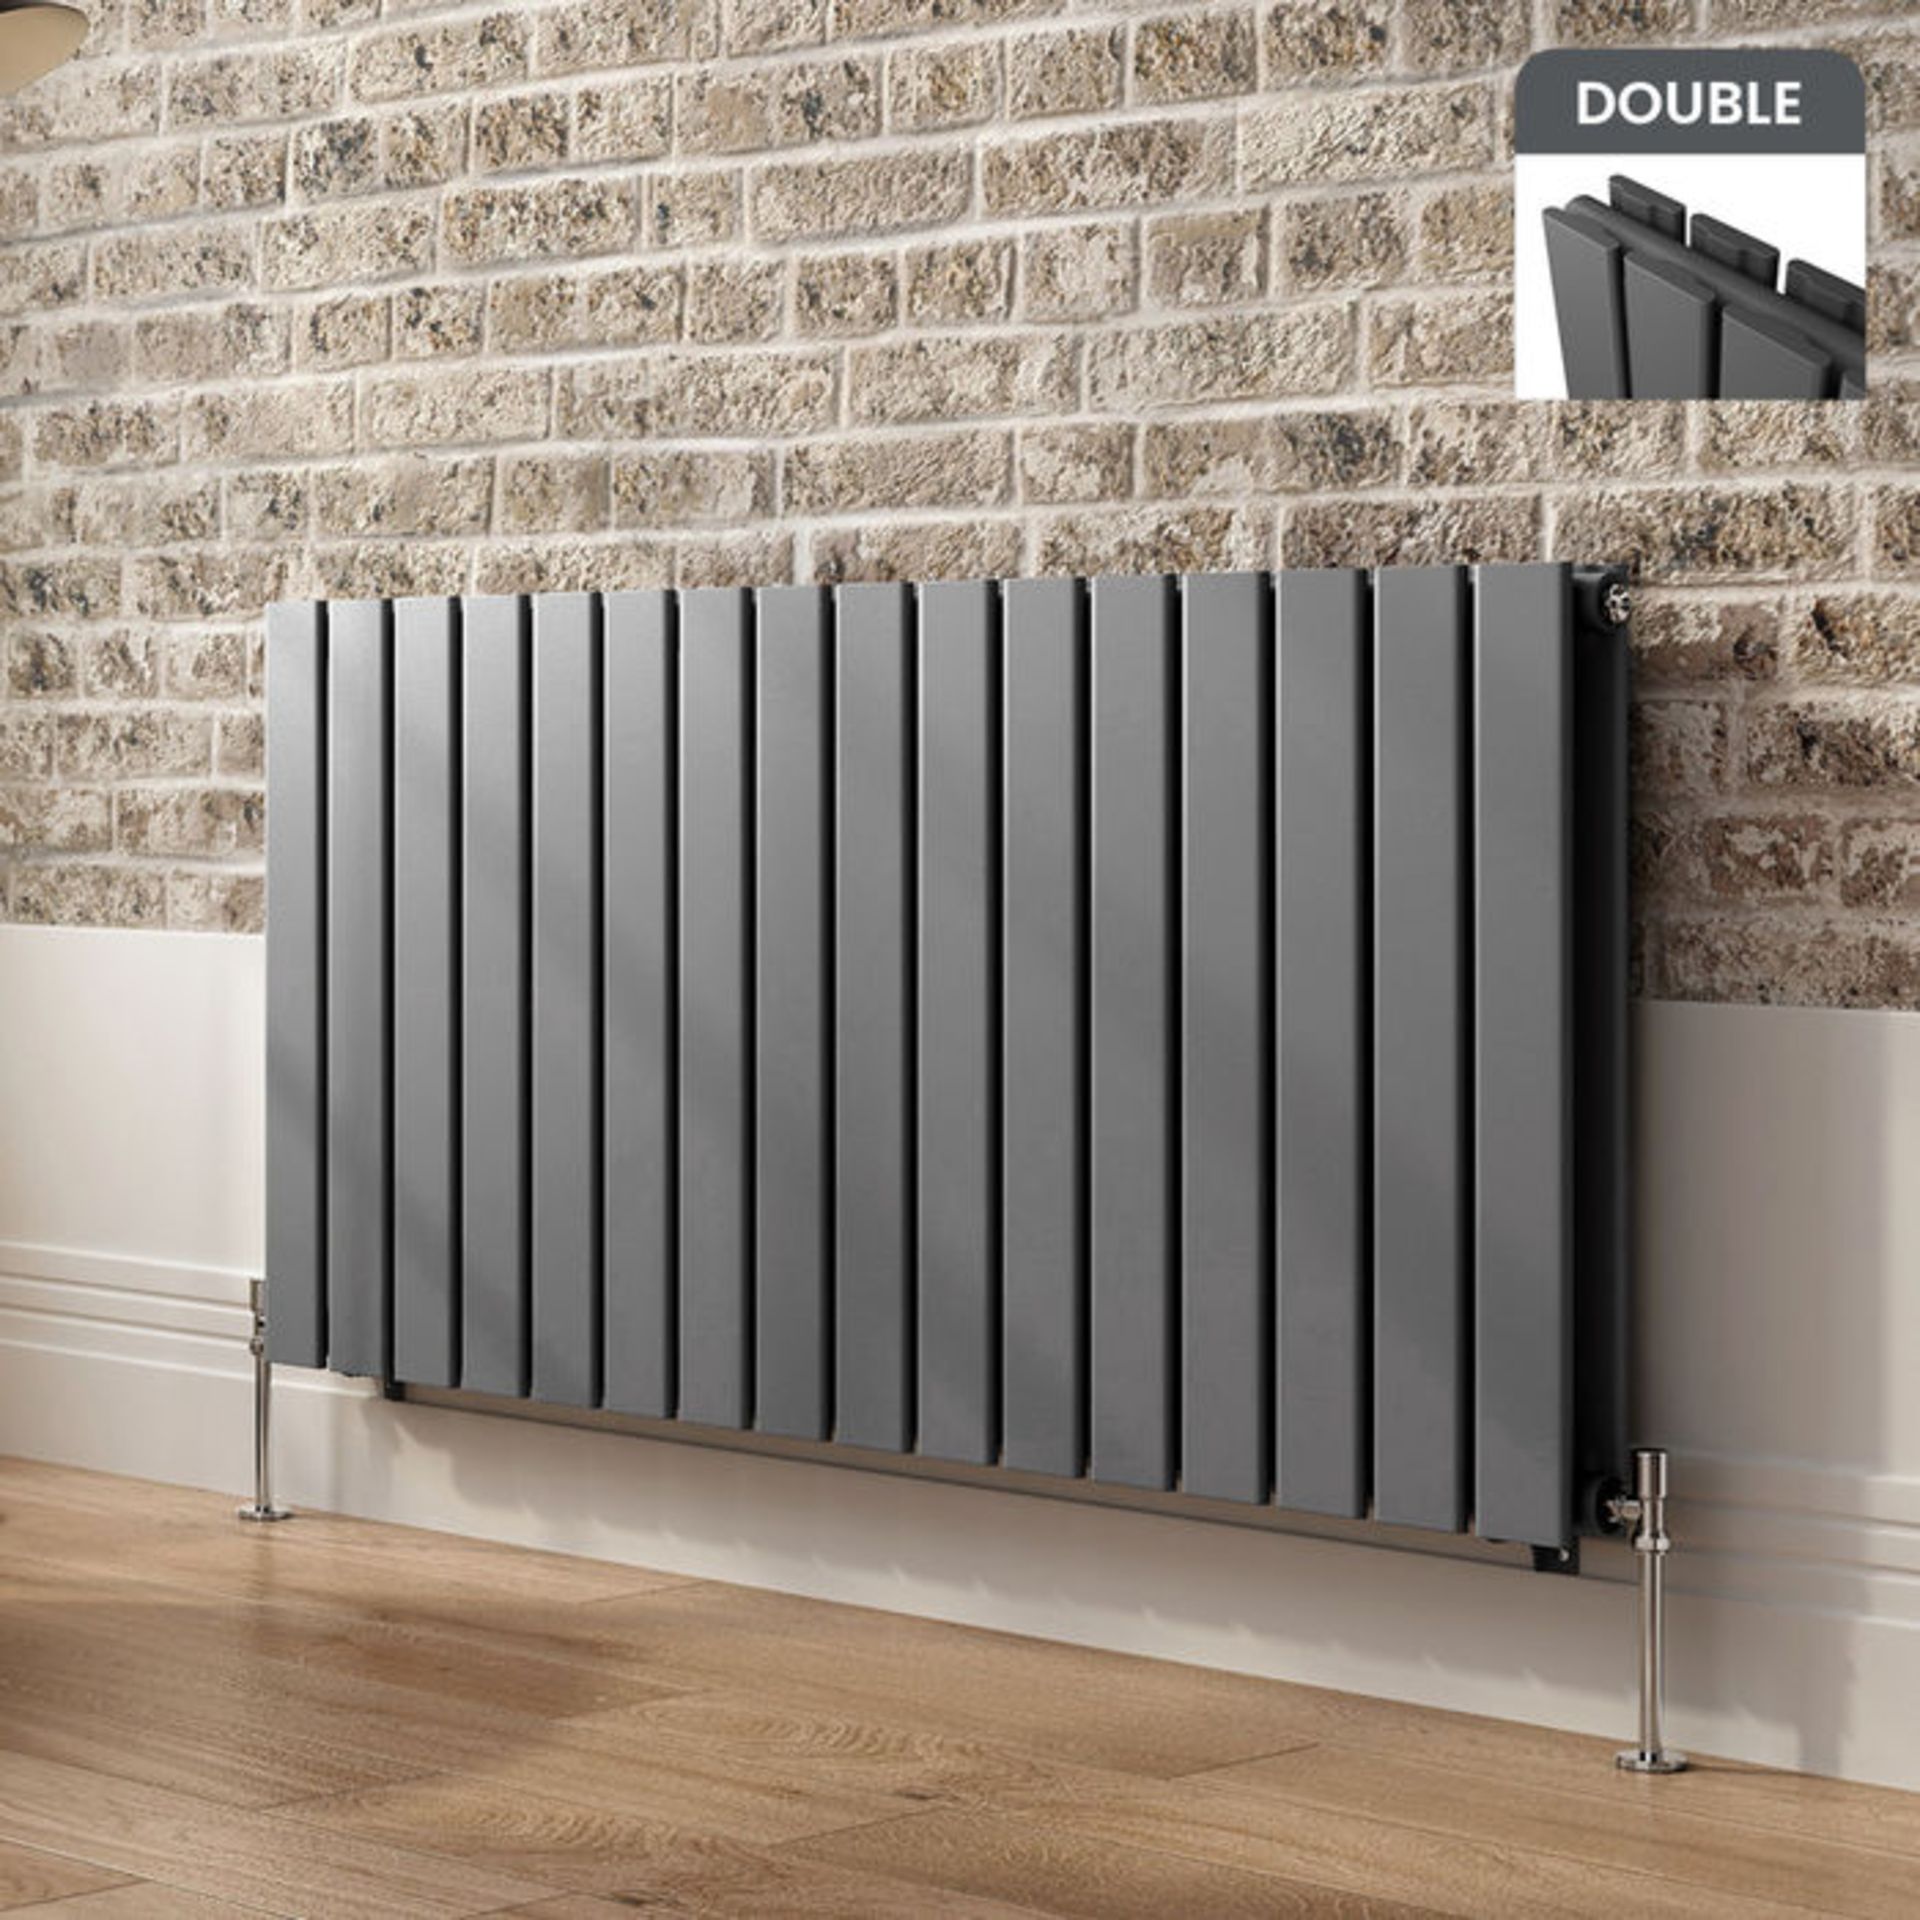 (AL219) 600x1210mm Anthracite Double Flat Panel Horizontal Radiator. RRP £224.99. Made with low